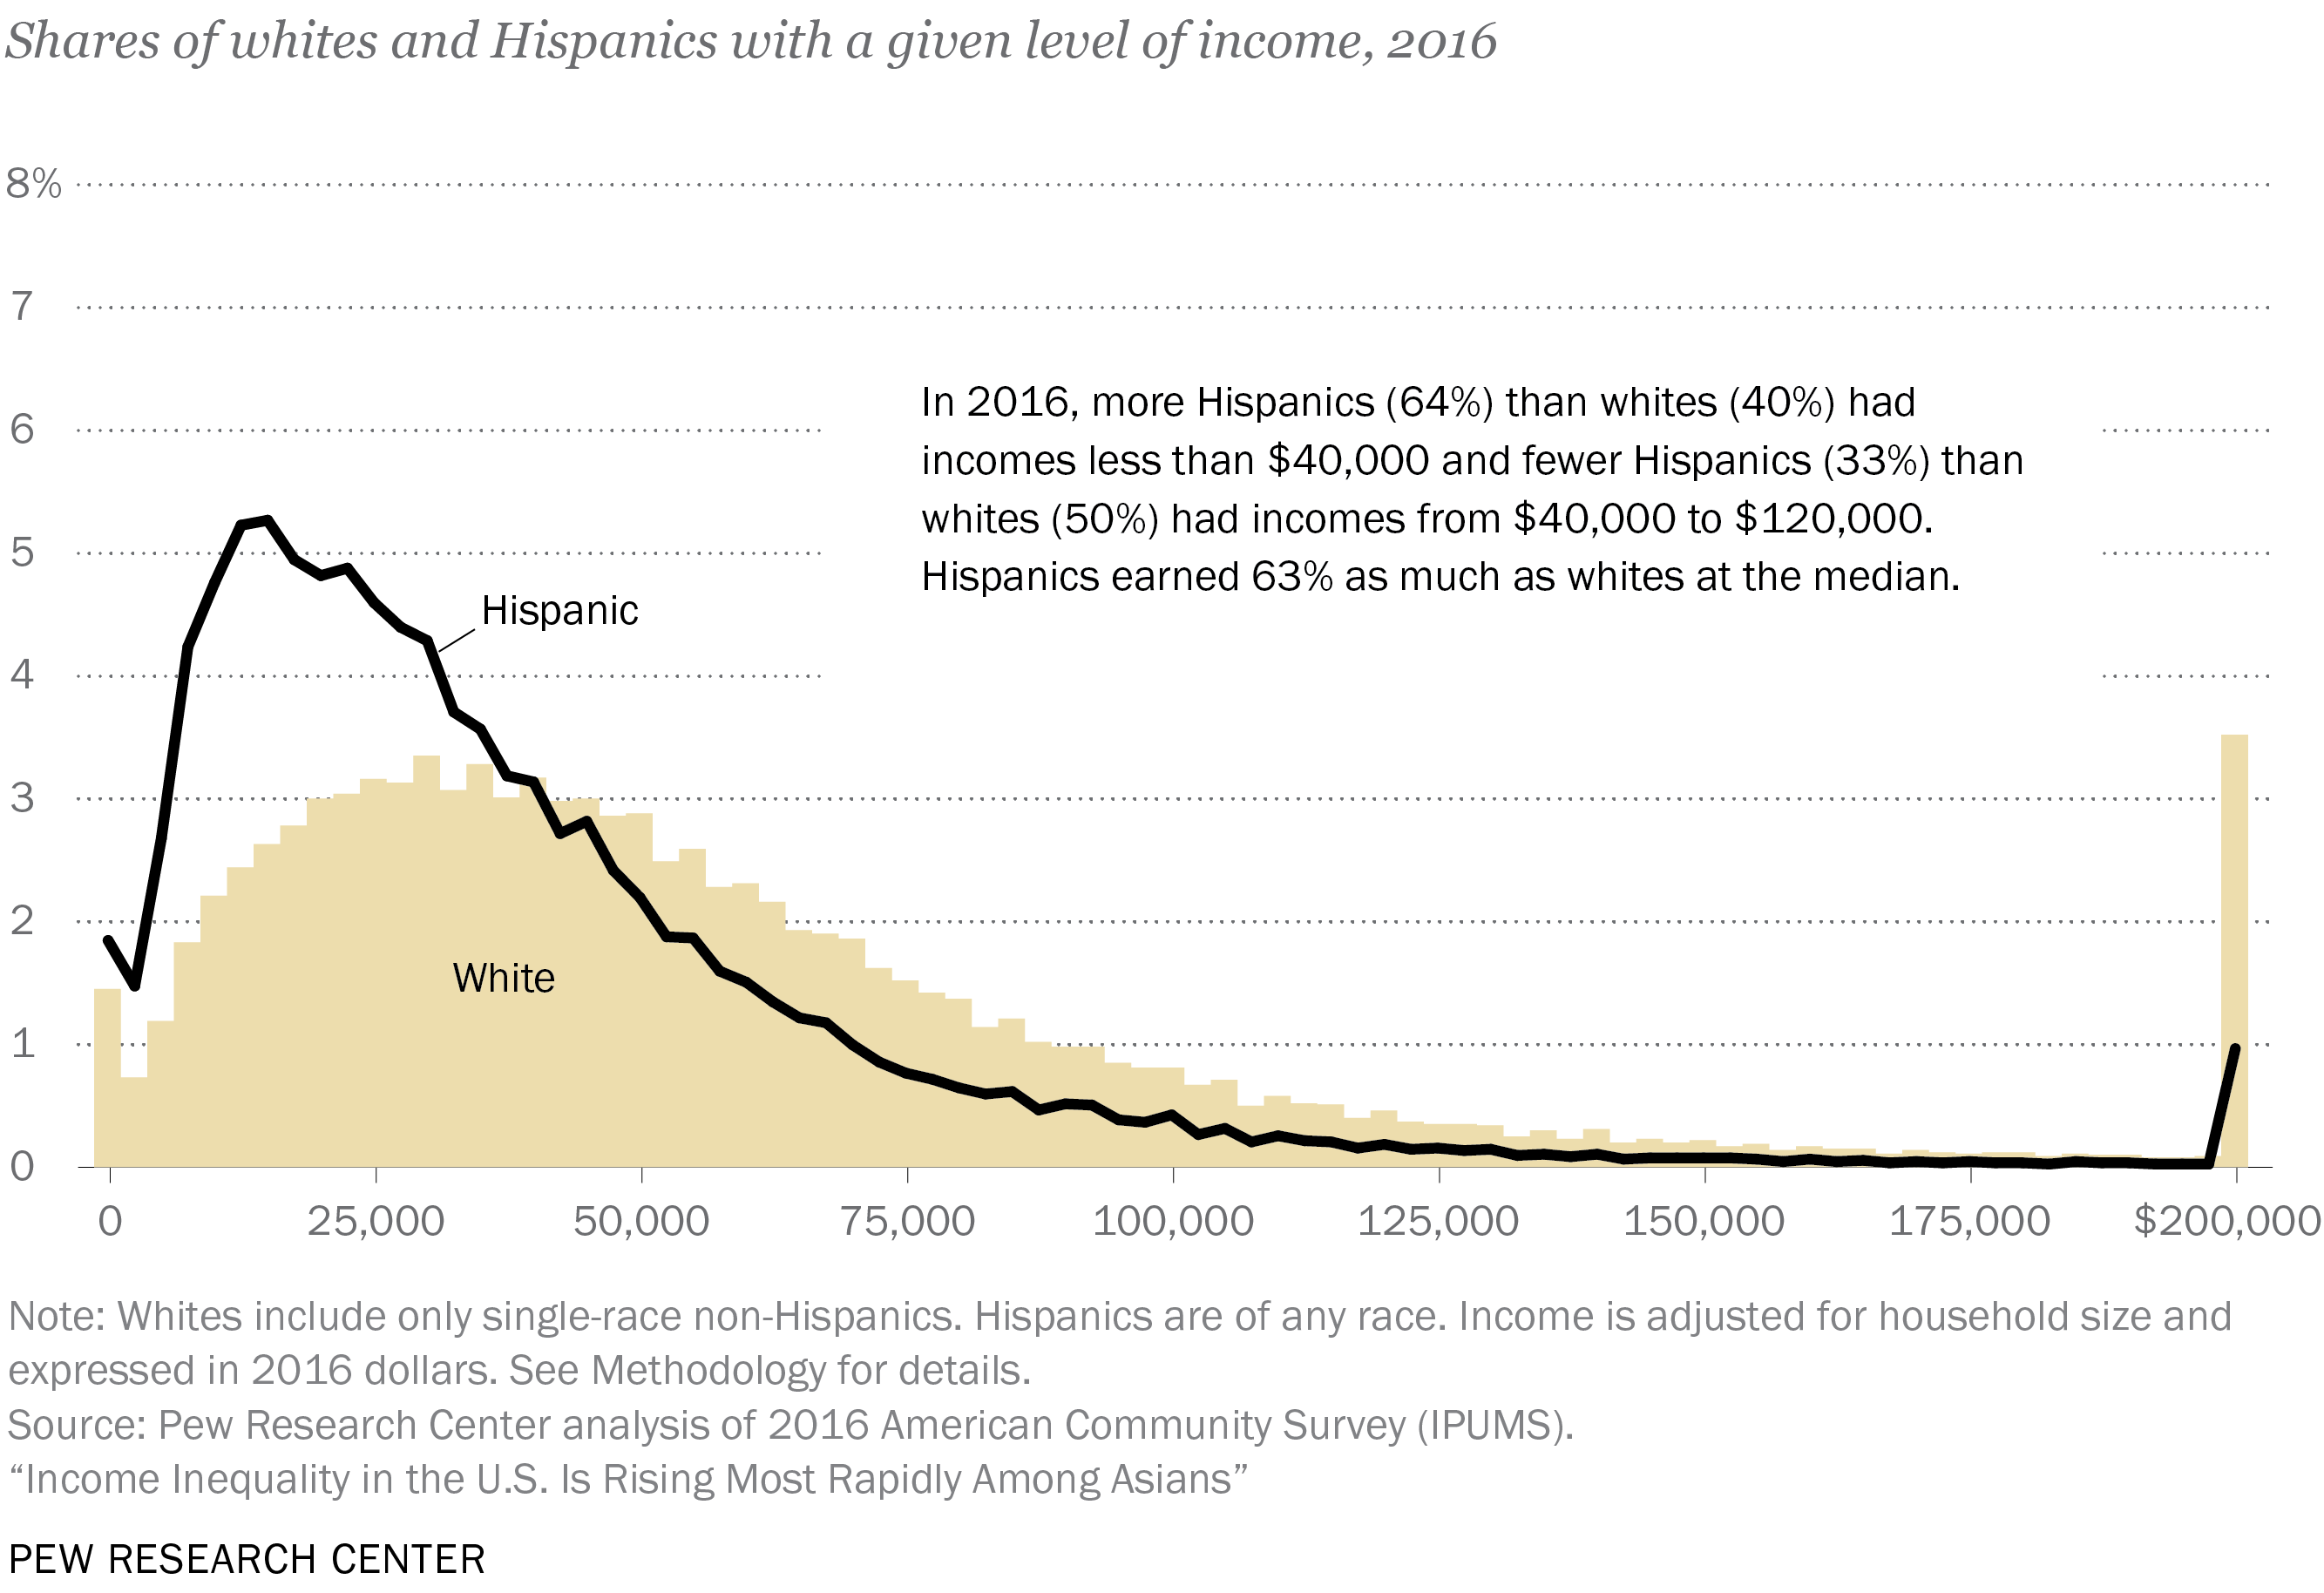 Share of whites and Hispanics with a given level of income, 2016